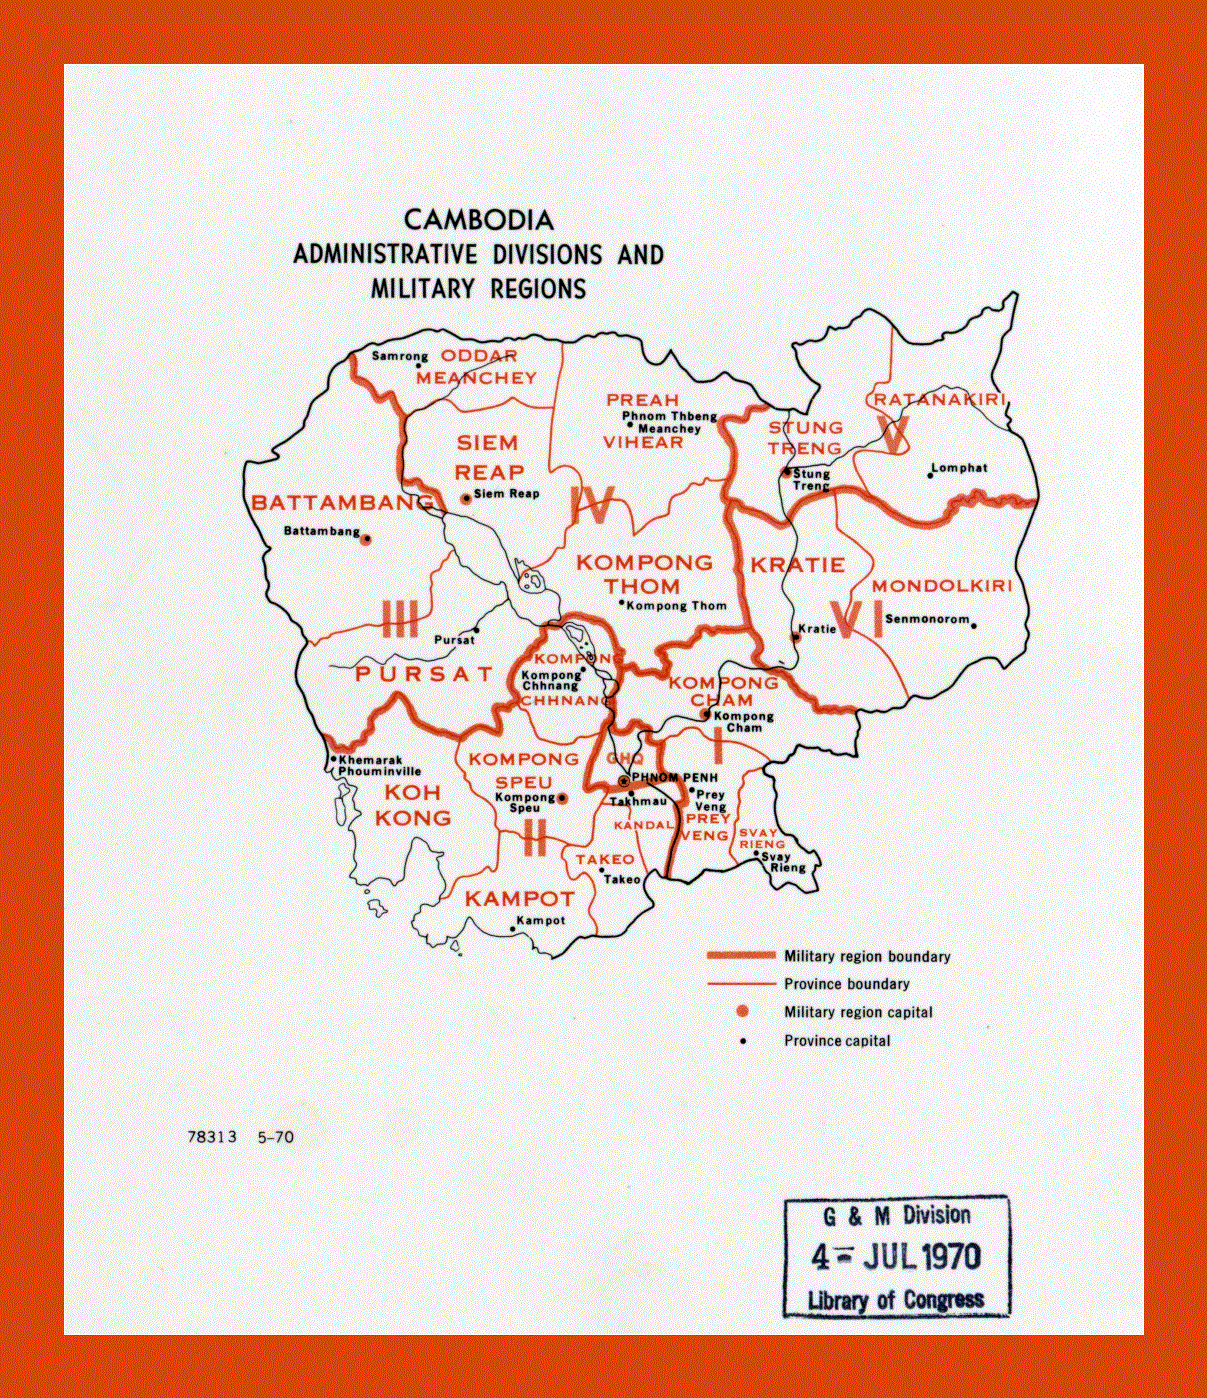 Administrative divisions and military regions map of Cambodia - 1970